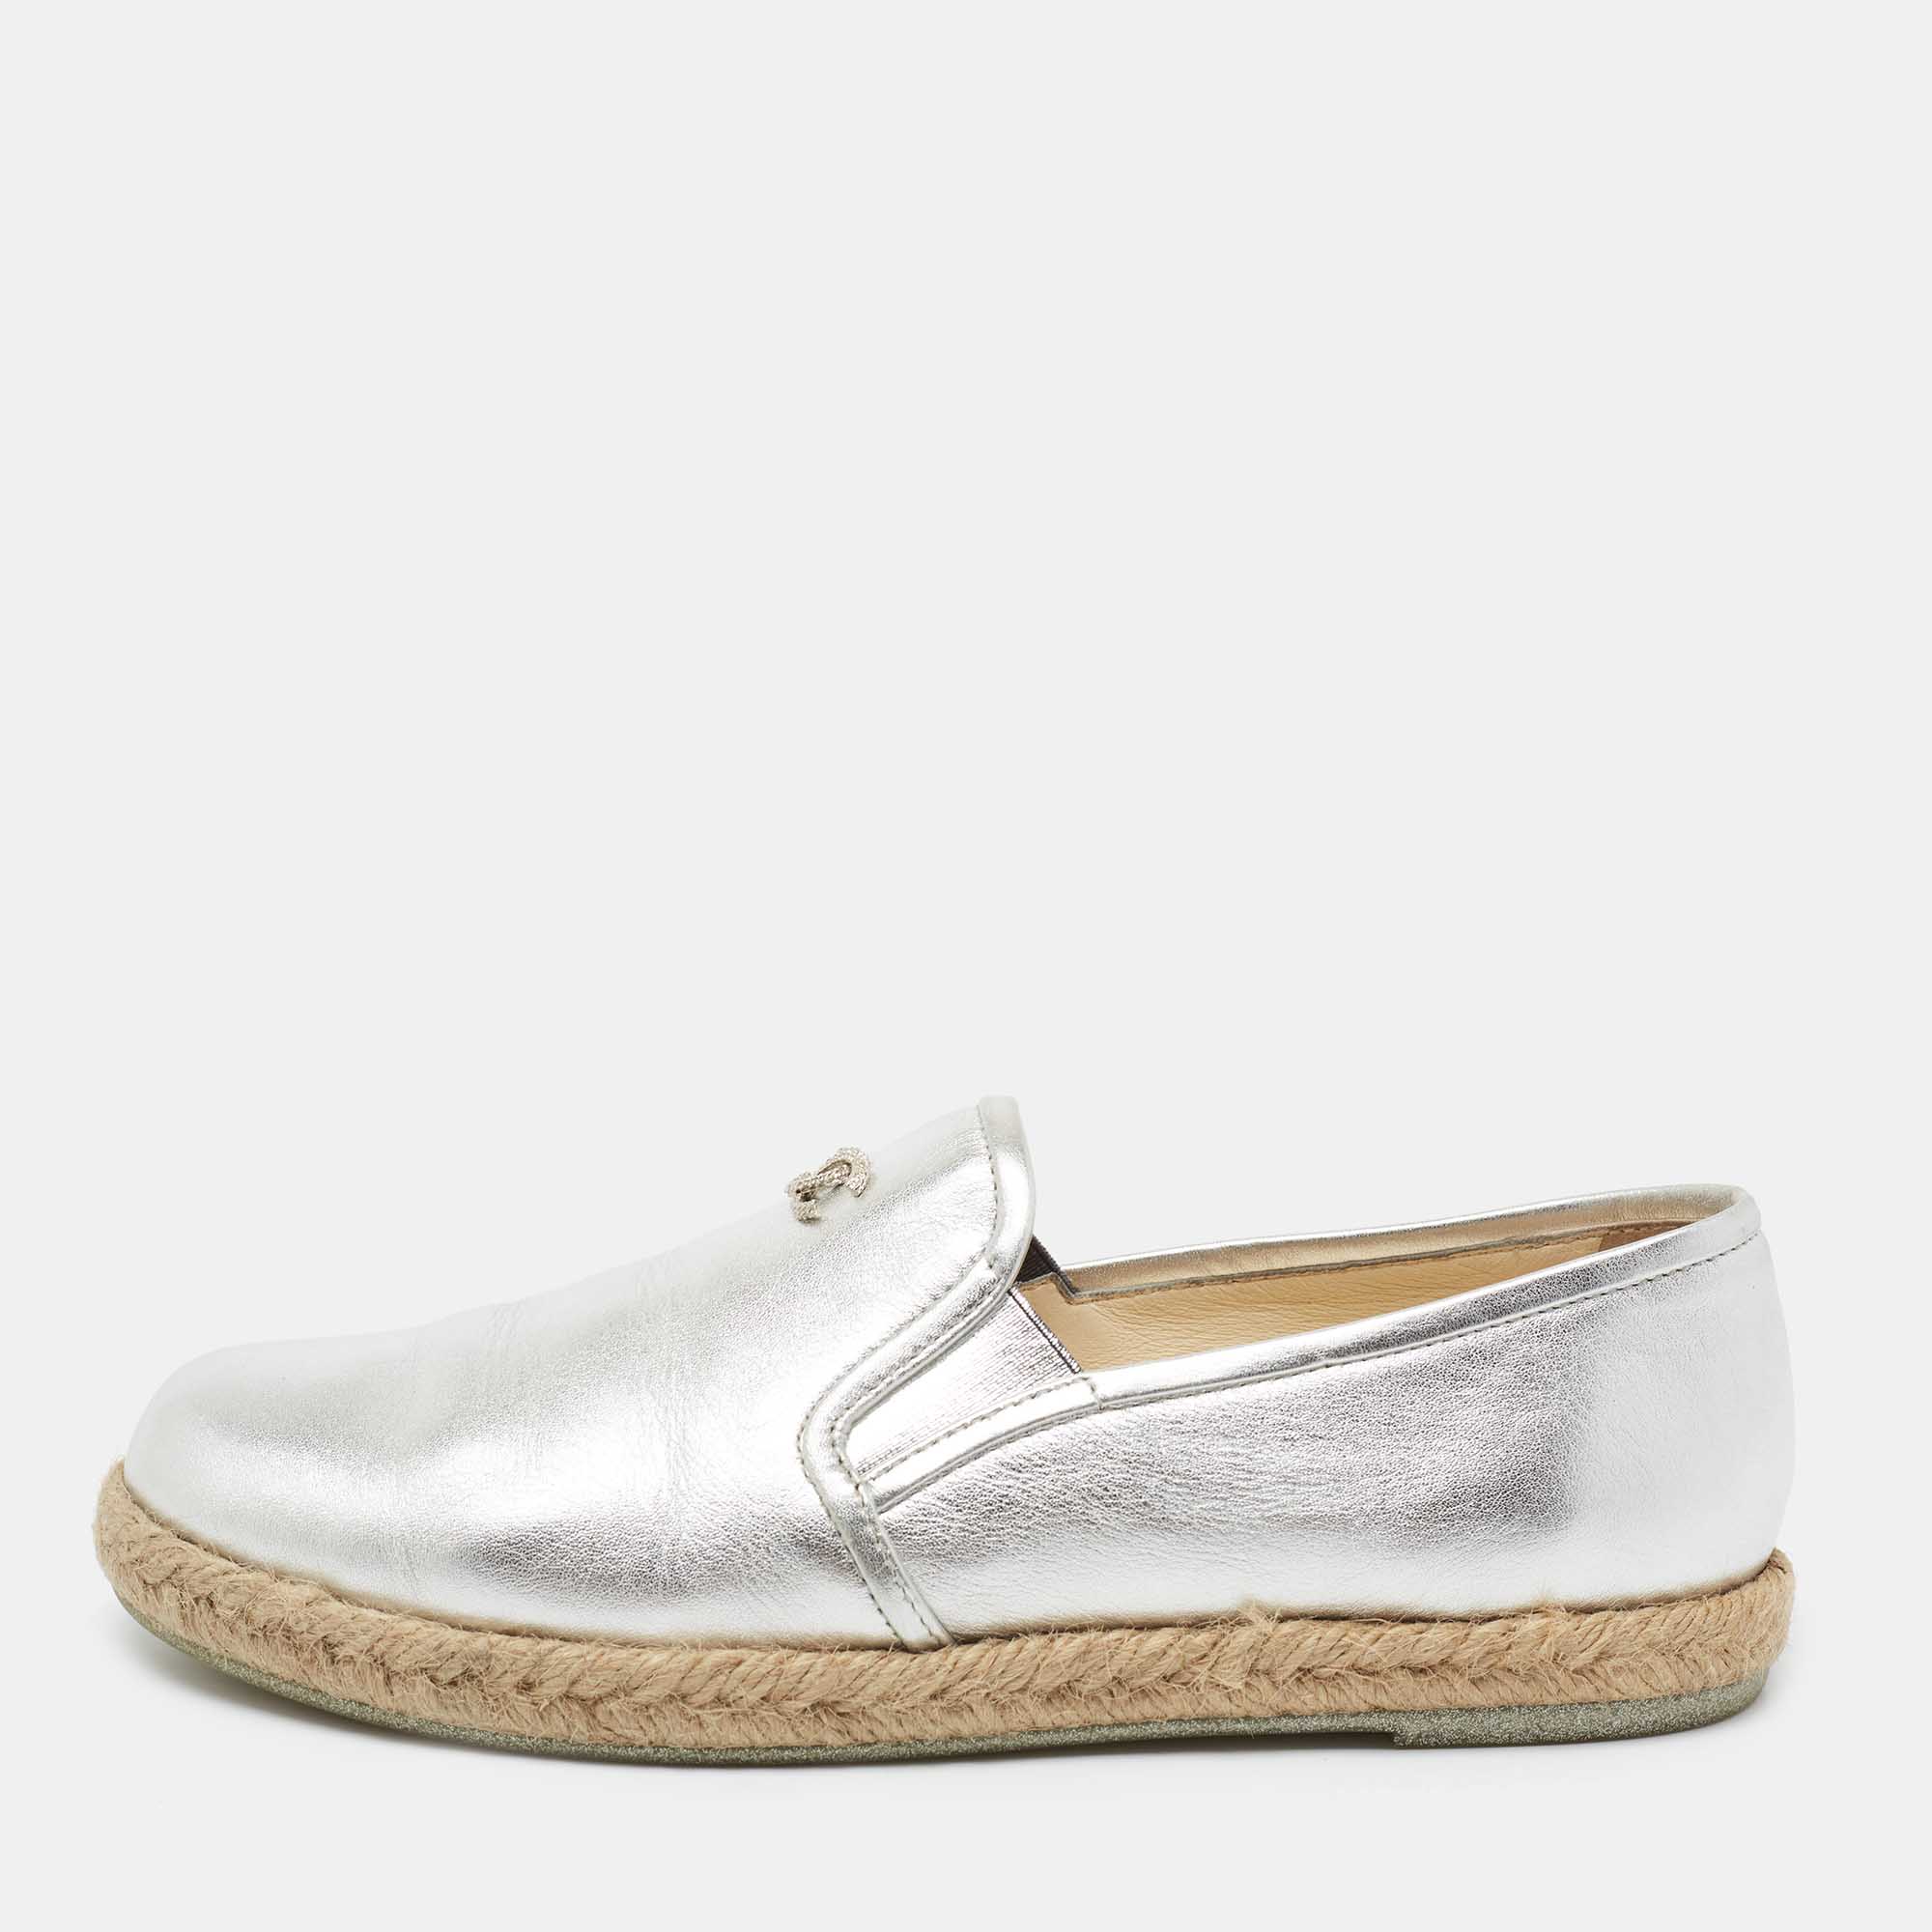 Chanel Metallic Silver Leather CC Espadrille Slip On Loafers Size 38